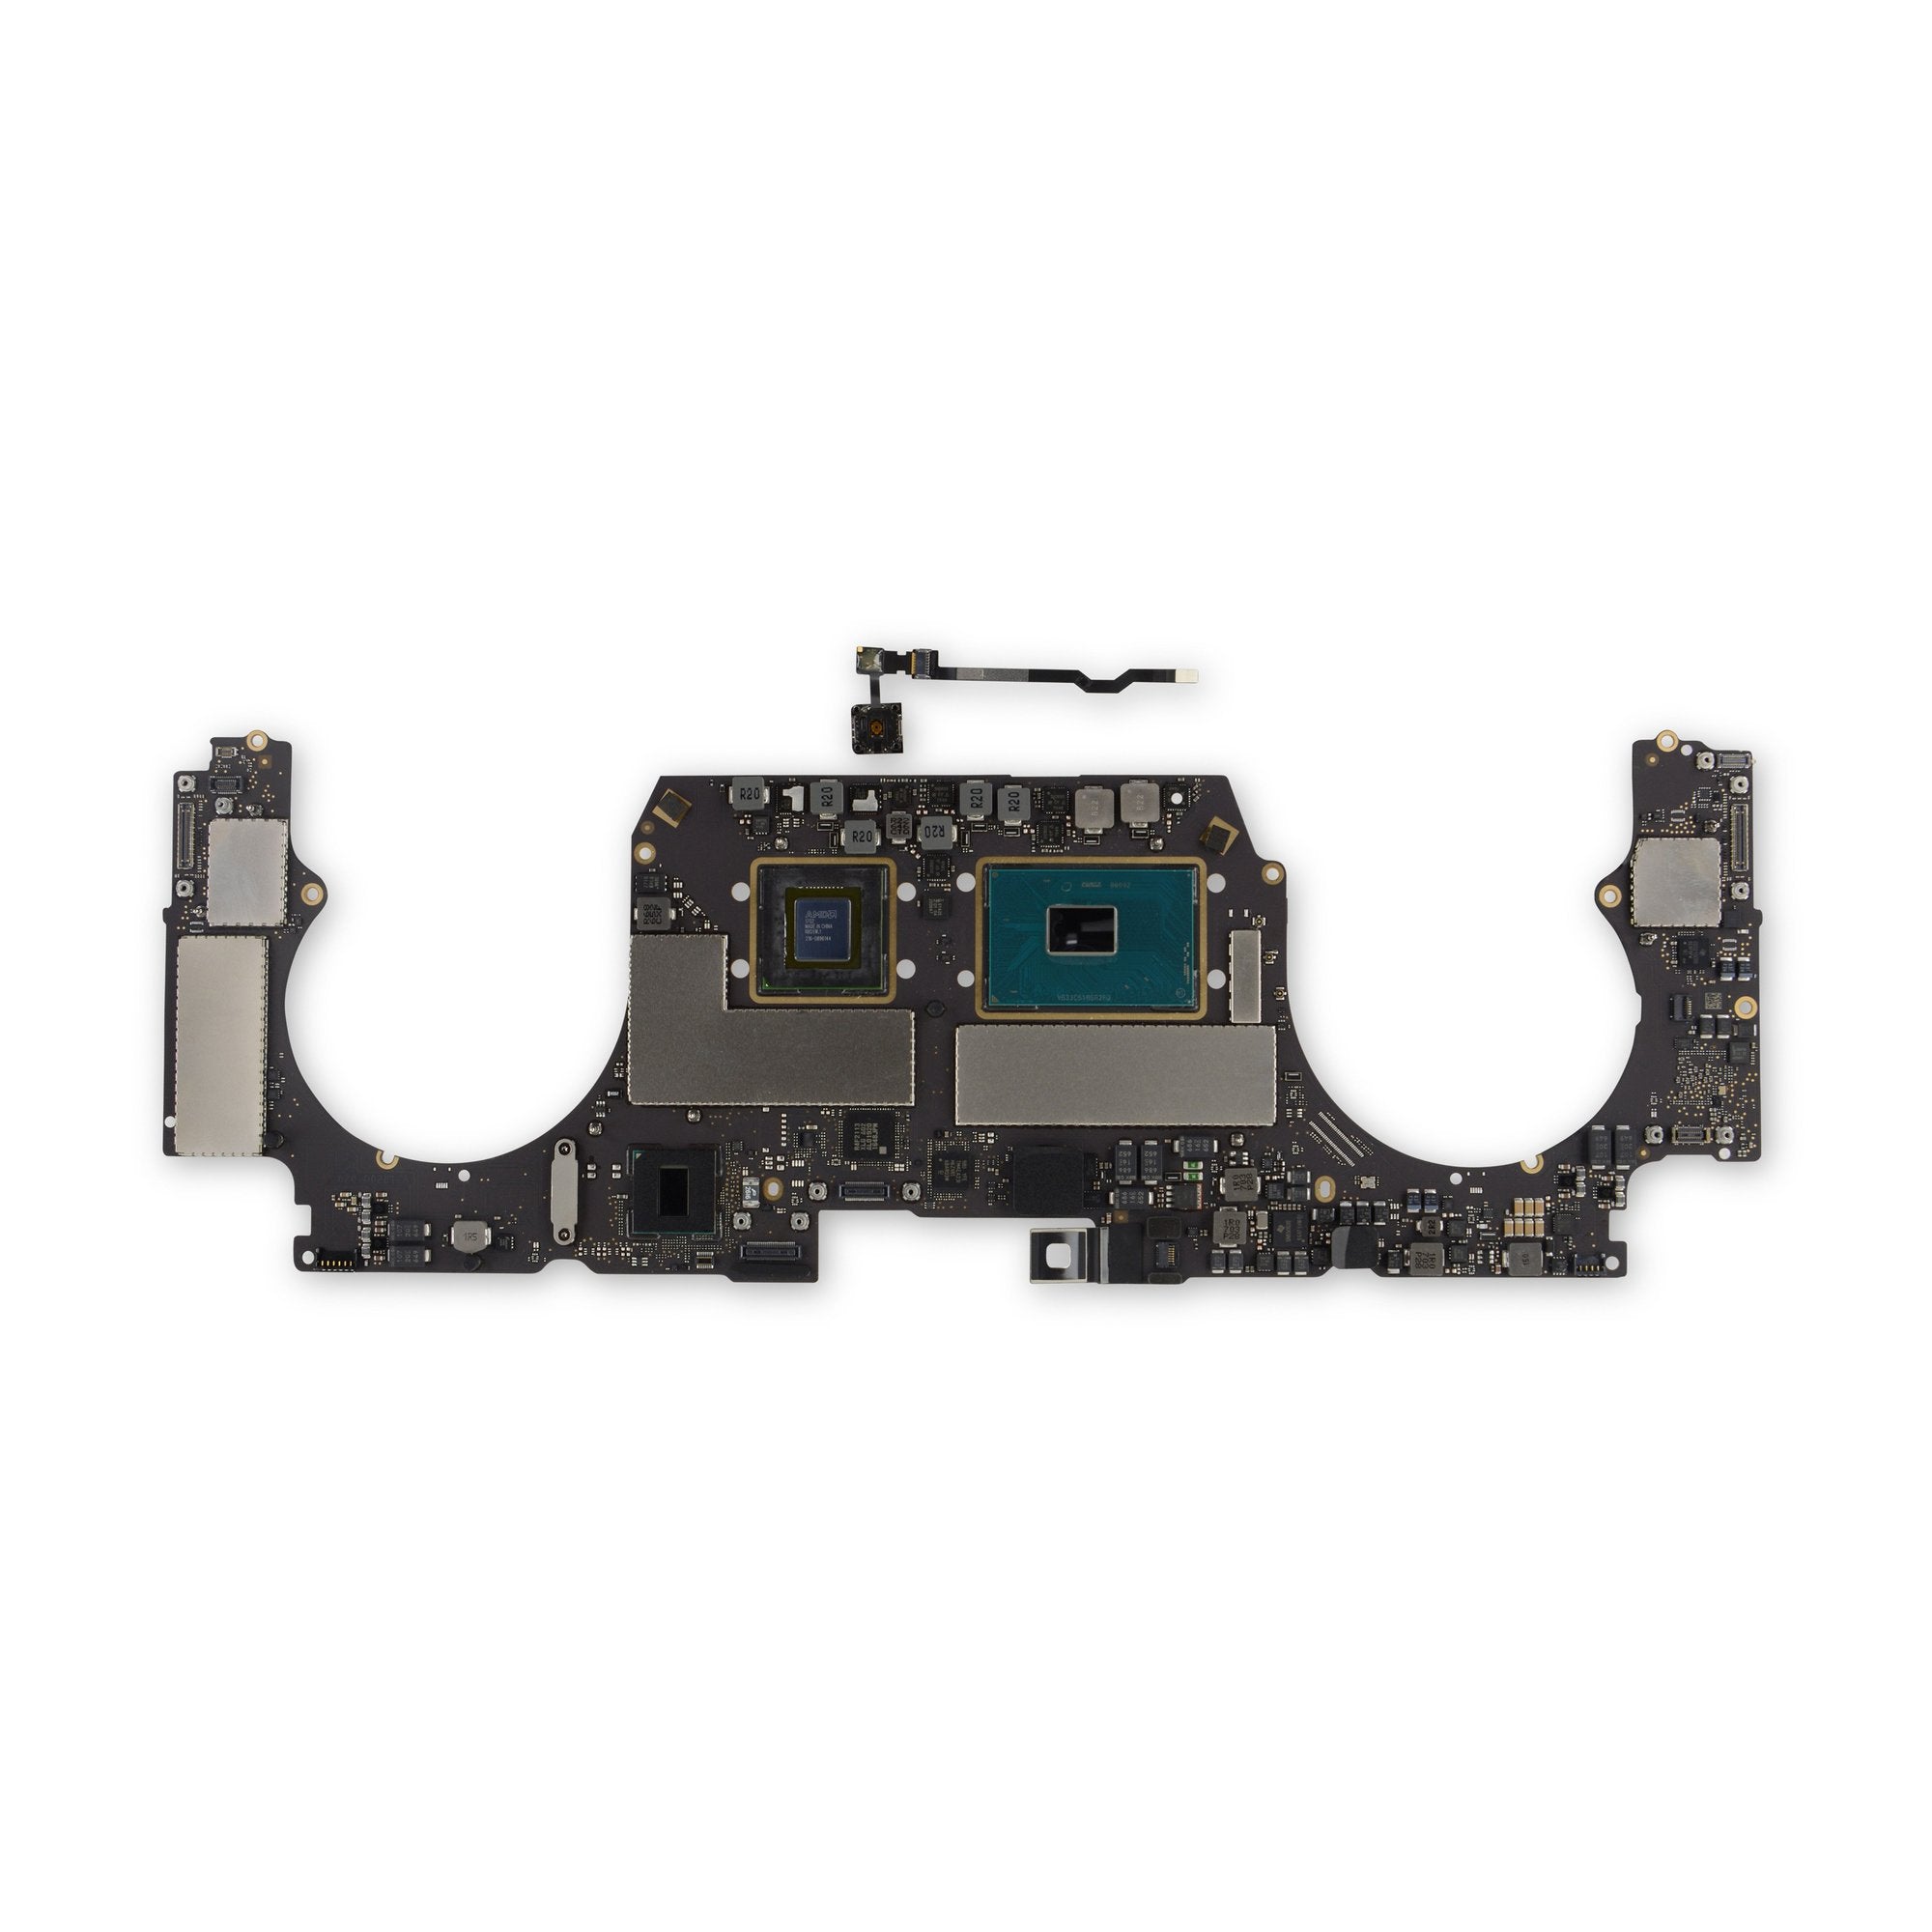 MacBook Pro 15" Retina (Late 2016) 2.9 GHz Logic Board, Radeon Pro 460, with Paired Touch ID Sensor 512 GB Used